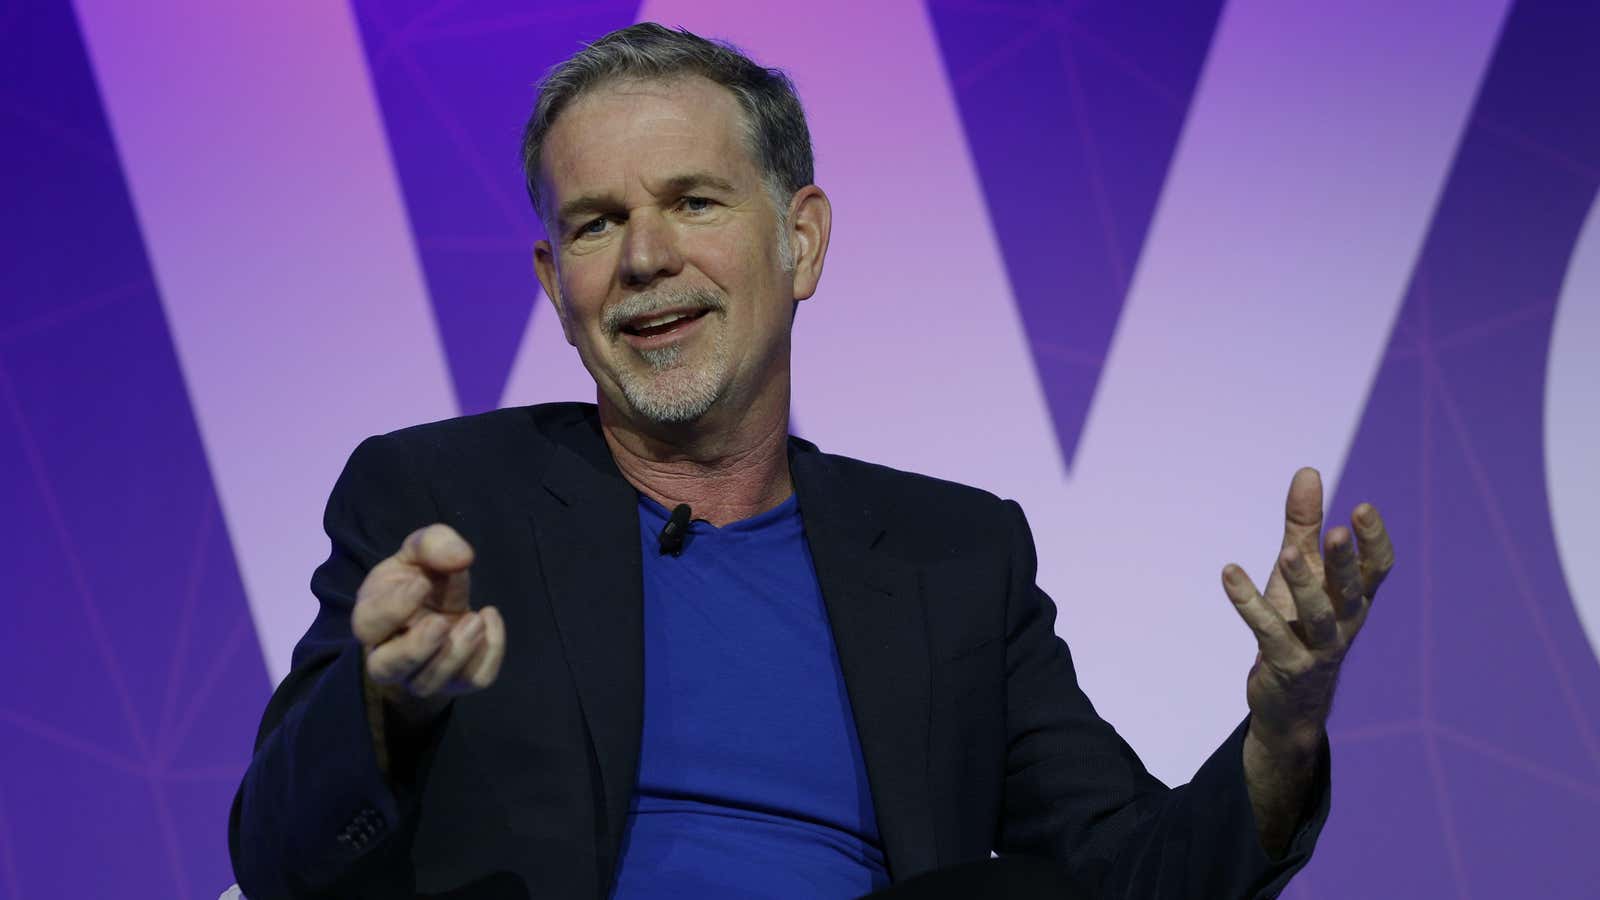 Who will be watching Netflix in 50 years?